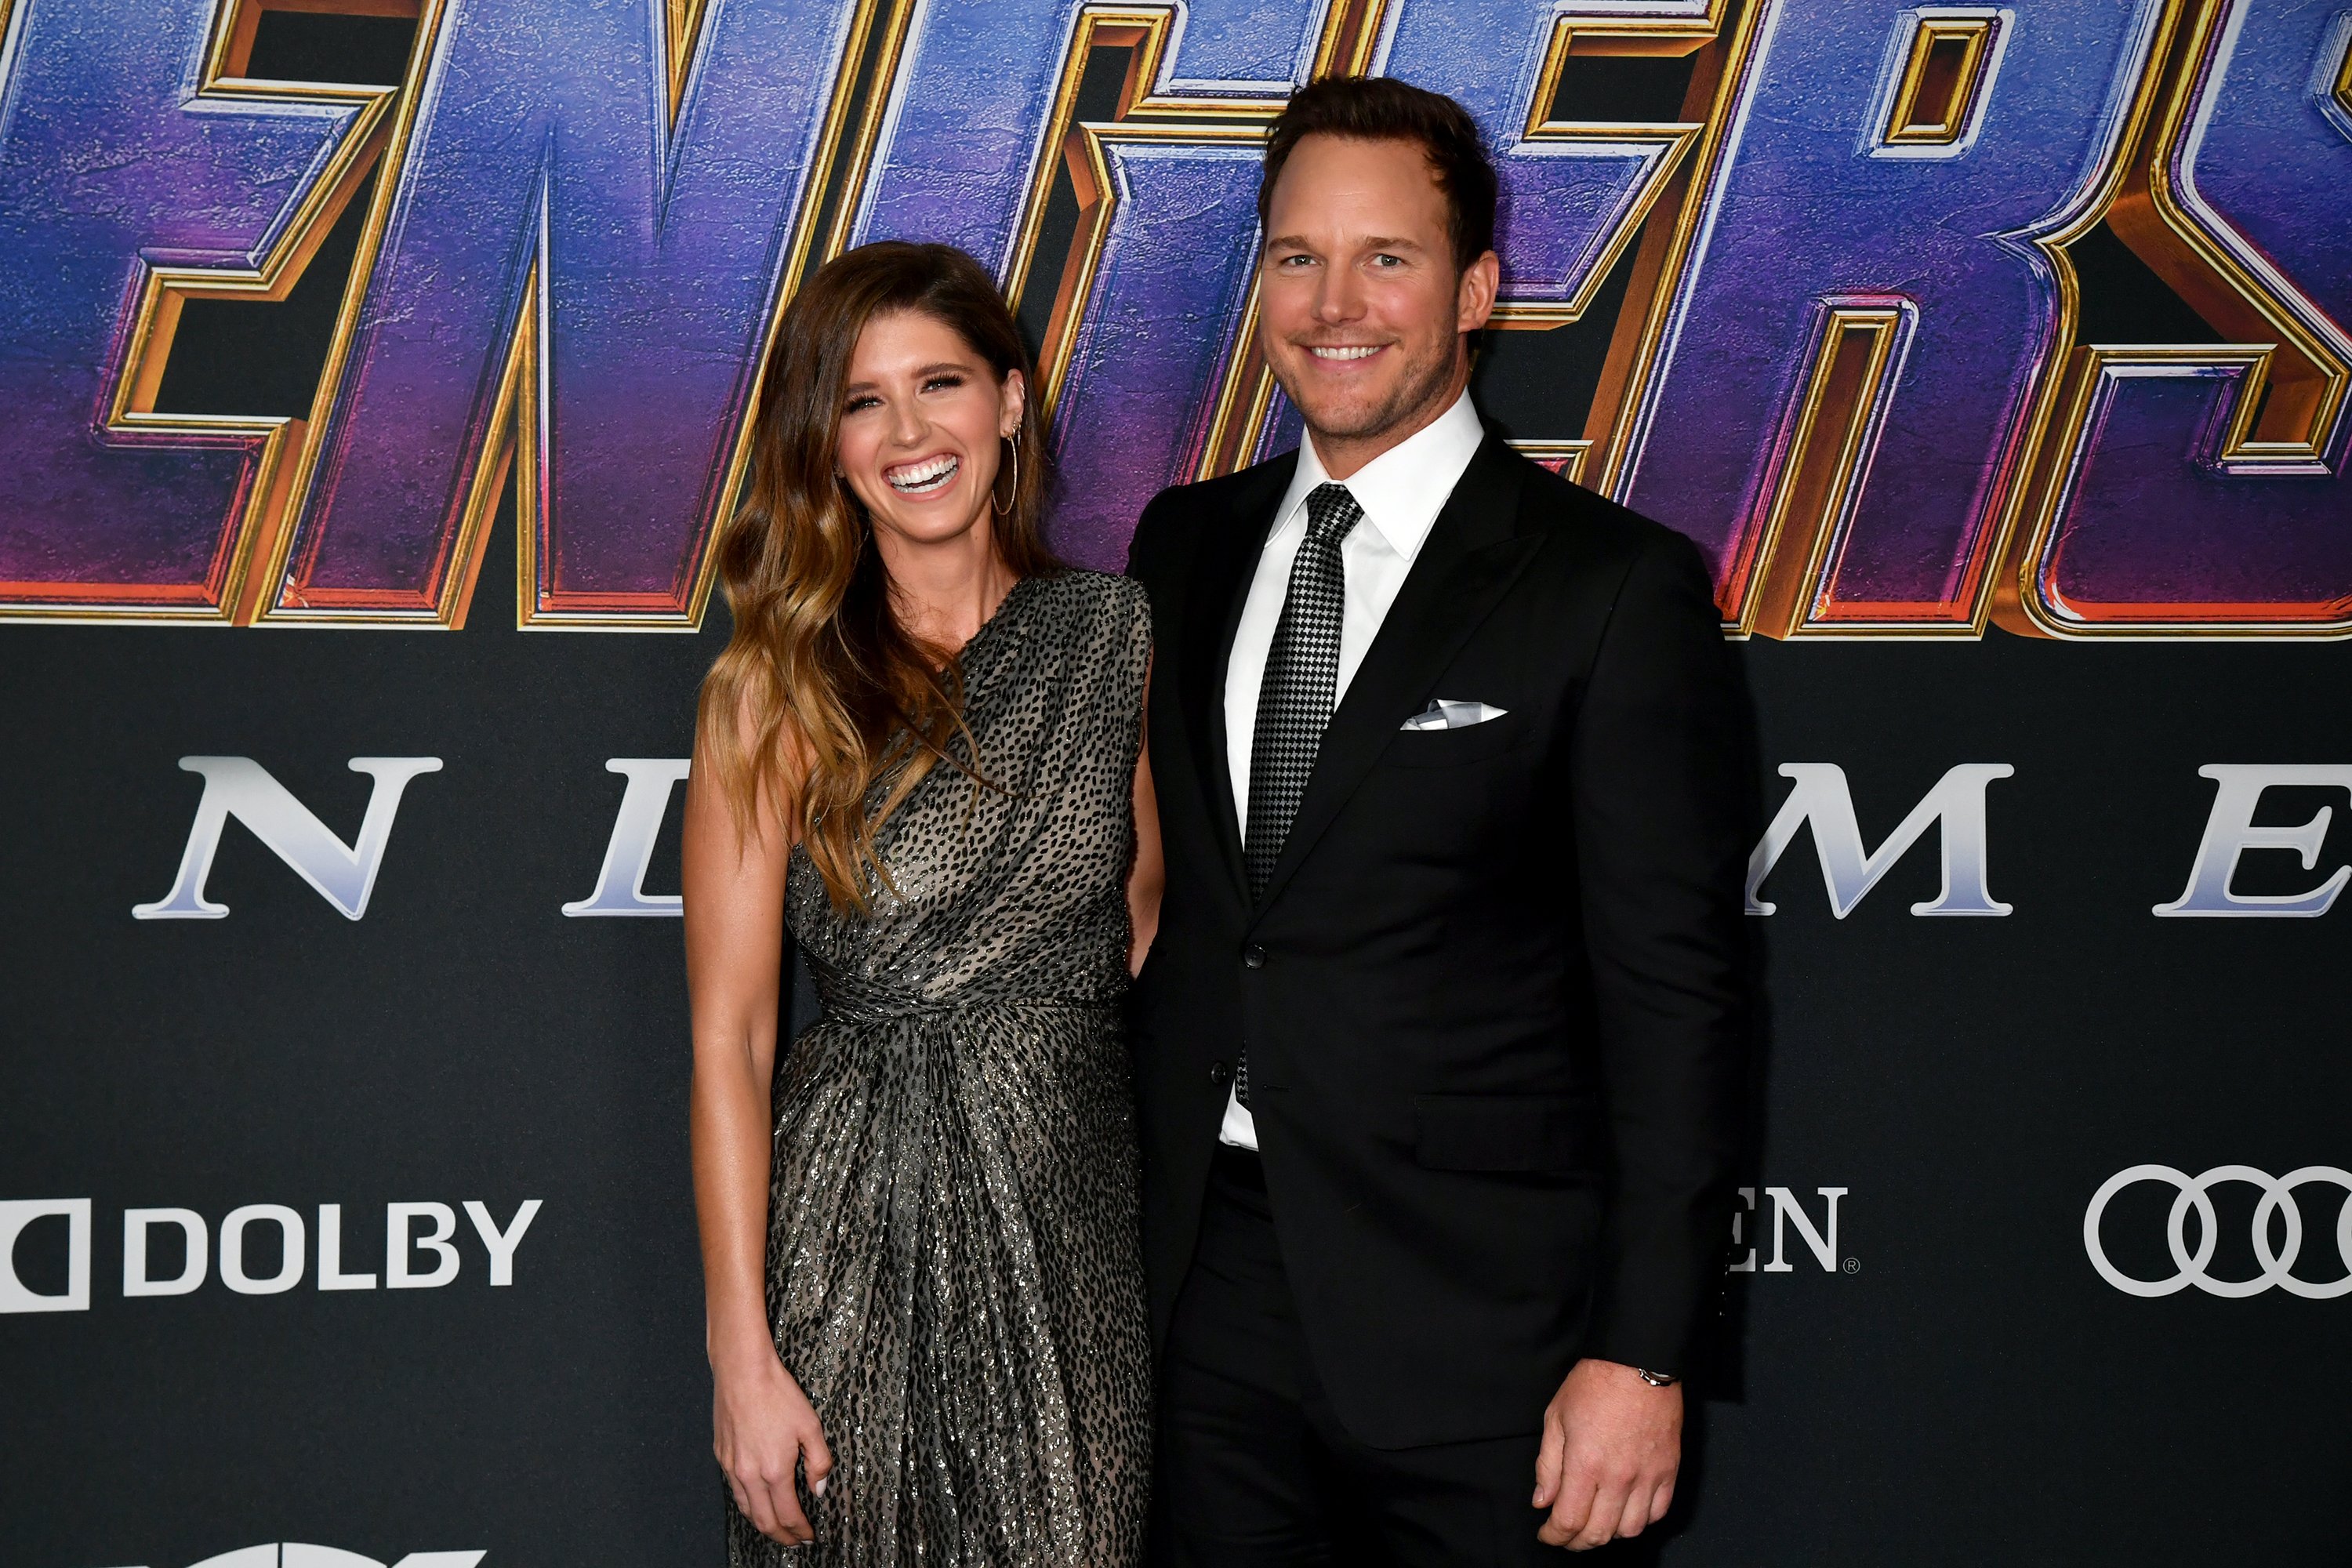 Author Katherine Schwarzenegger and actor Chris Pratt during the World Premiere of "Avengers: Endgame" at Los Angeles Convention Center on April 22, 2019 in Los Angeles, California. | Source: Getty Images